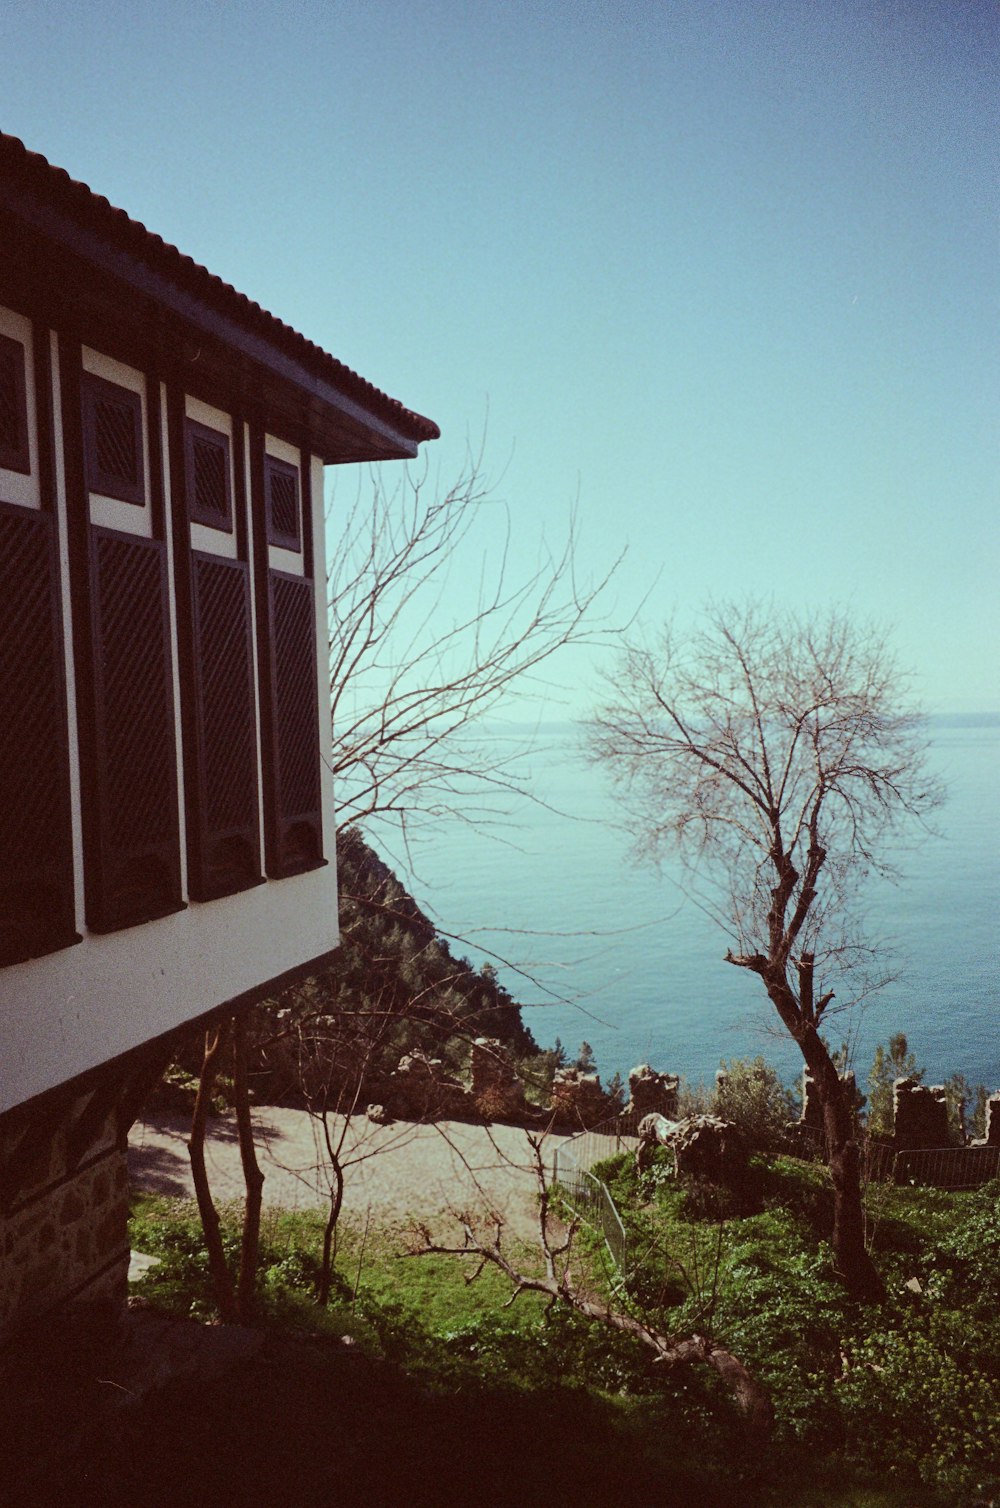 a view of a body of water from a house